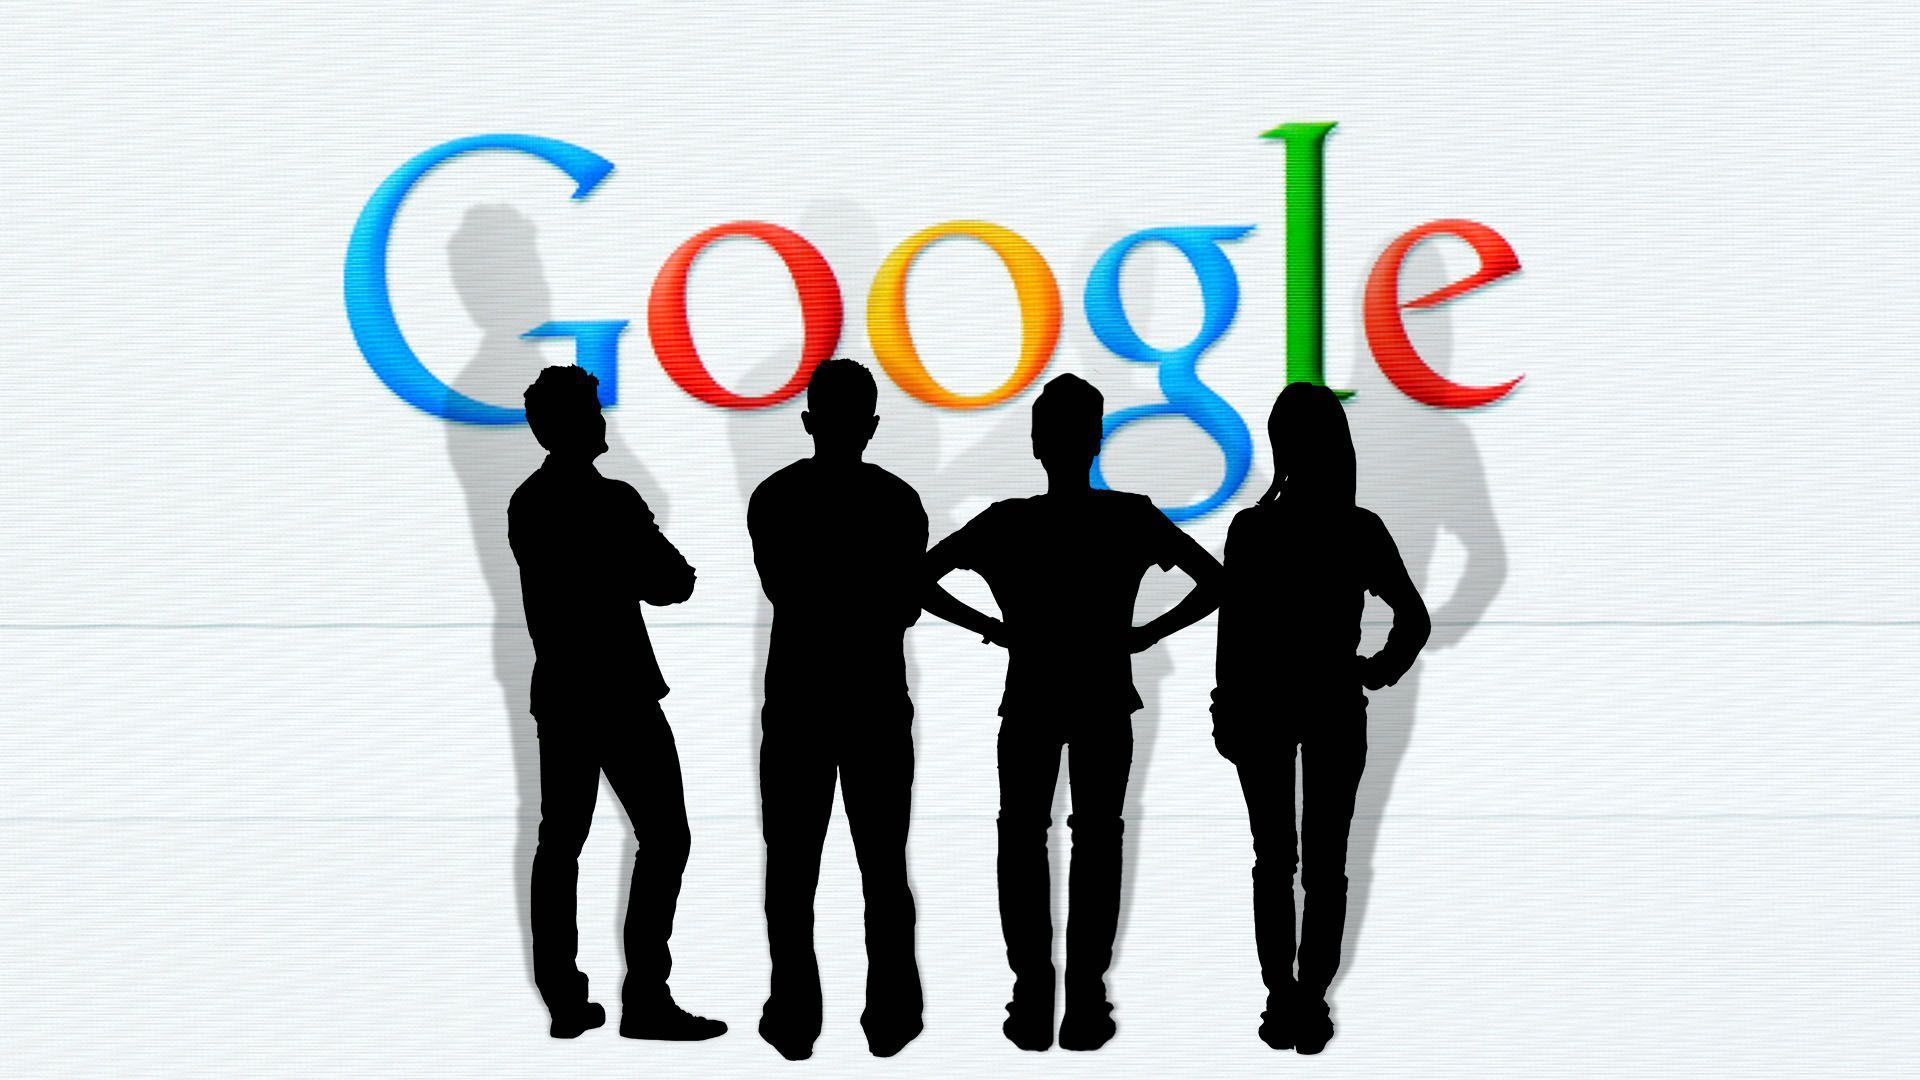 An illustration of four peoples' silhouettes in front of a Google logo